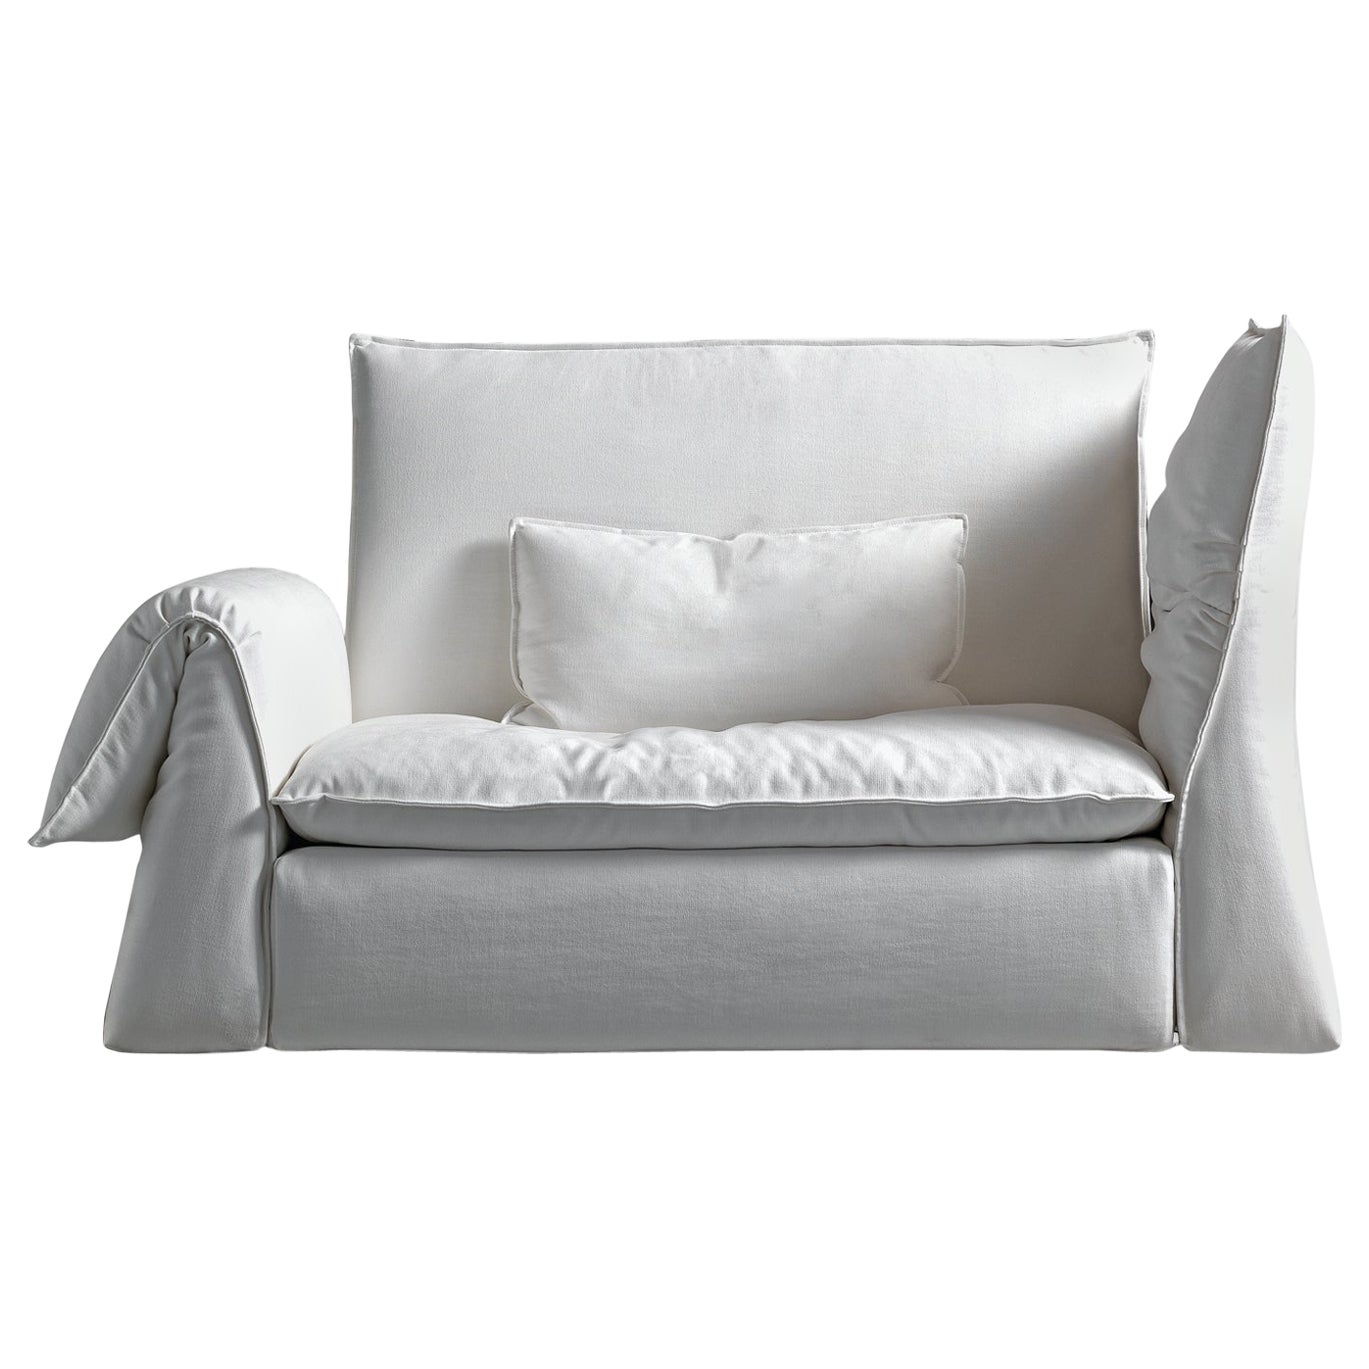 Les Femmes Small Foldable Armchair in Byblos White Upholstery by Giuseppe Viganò For Sale